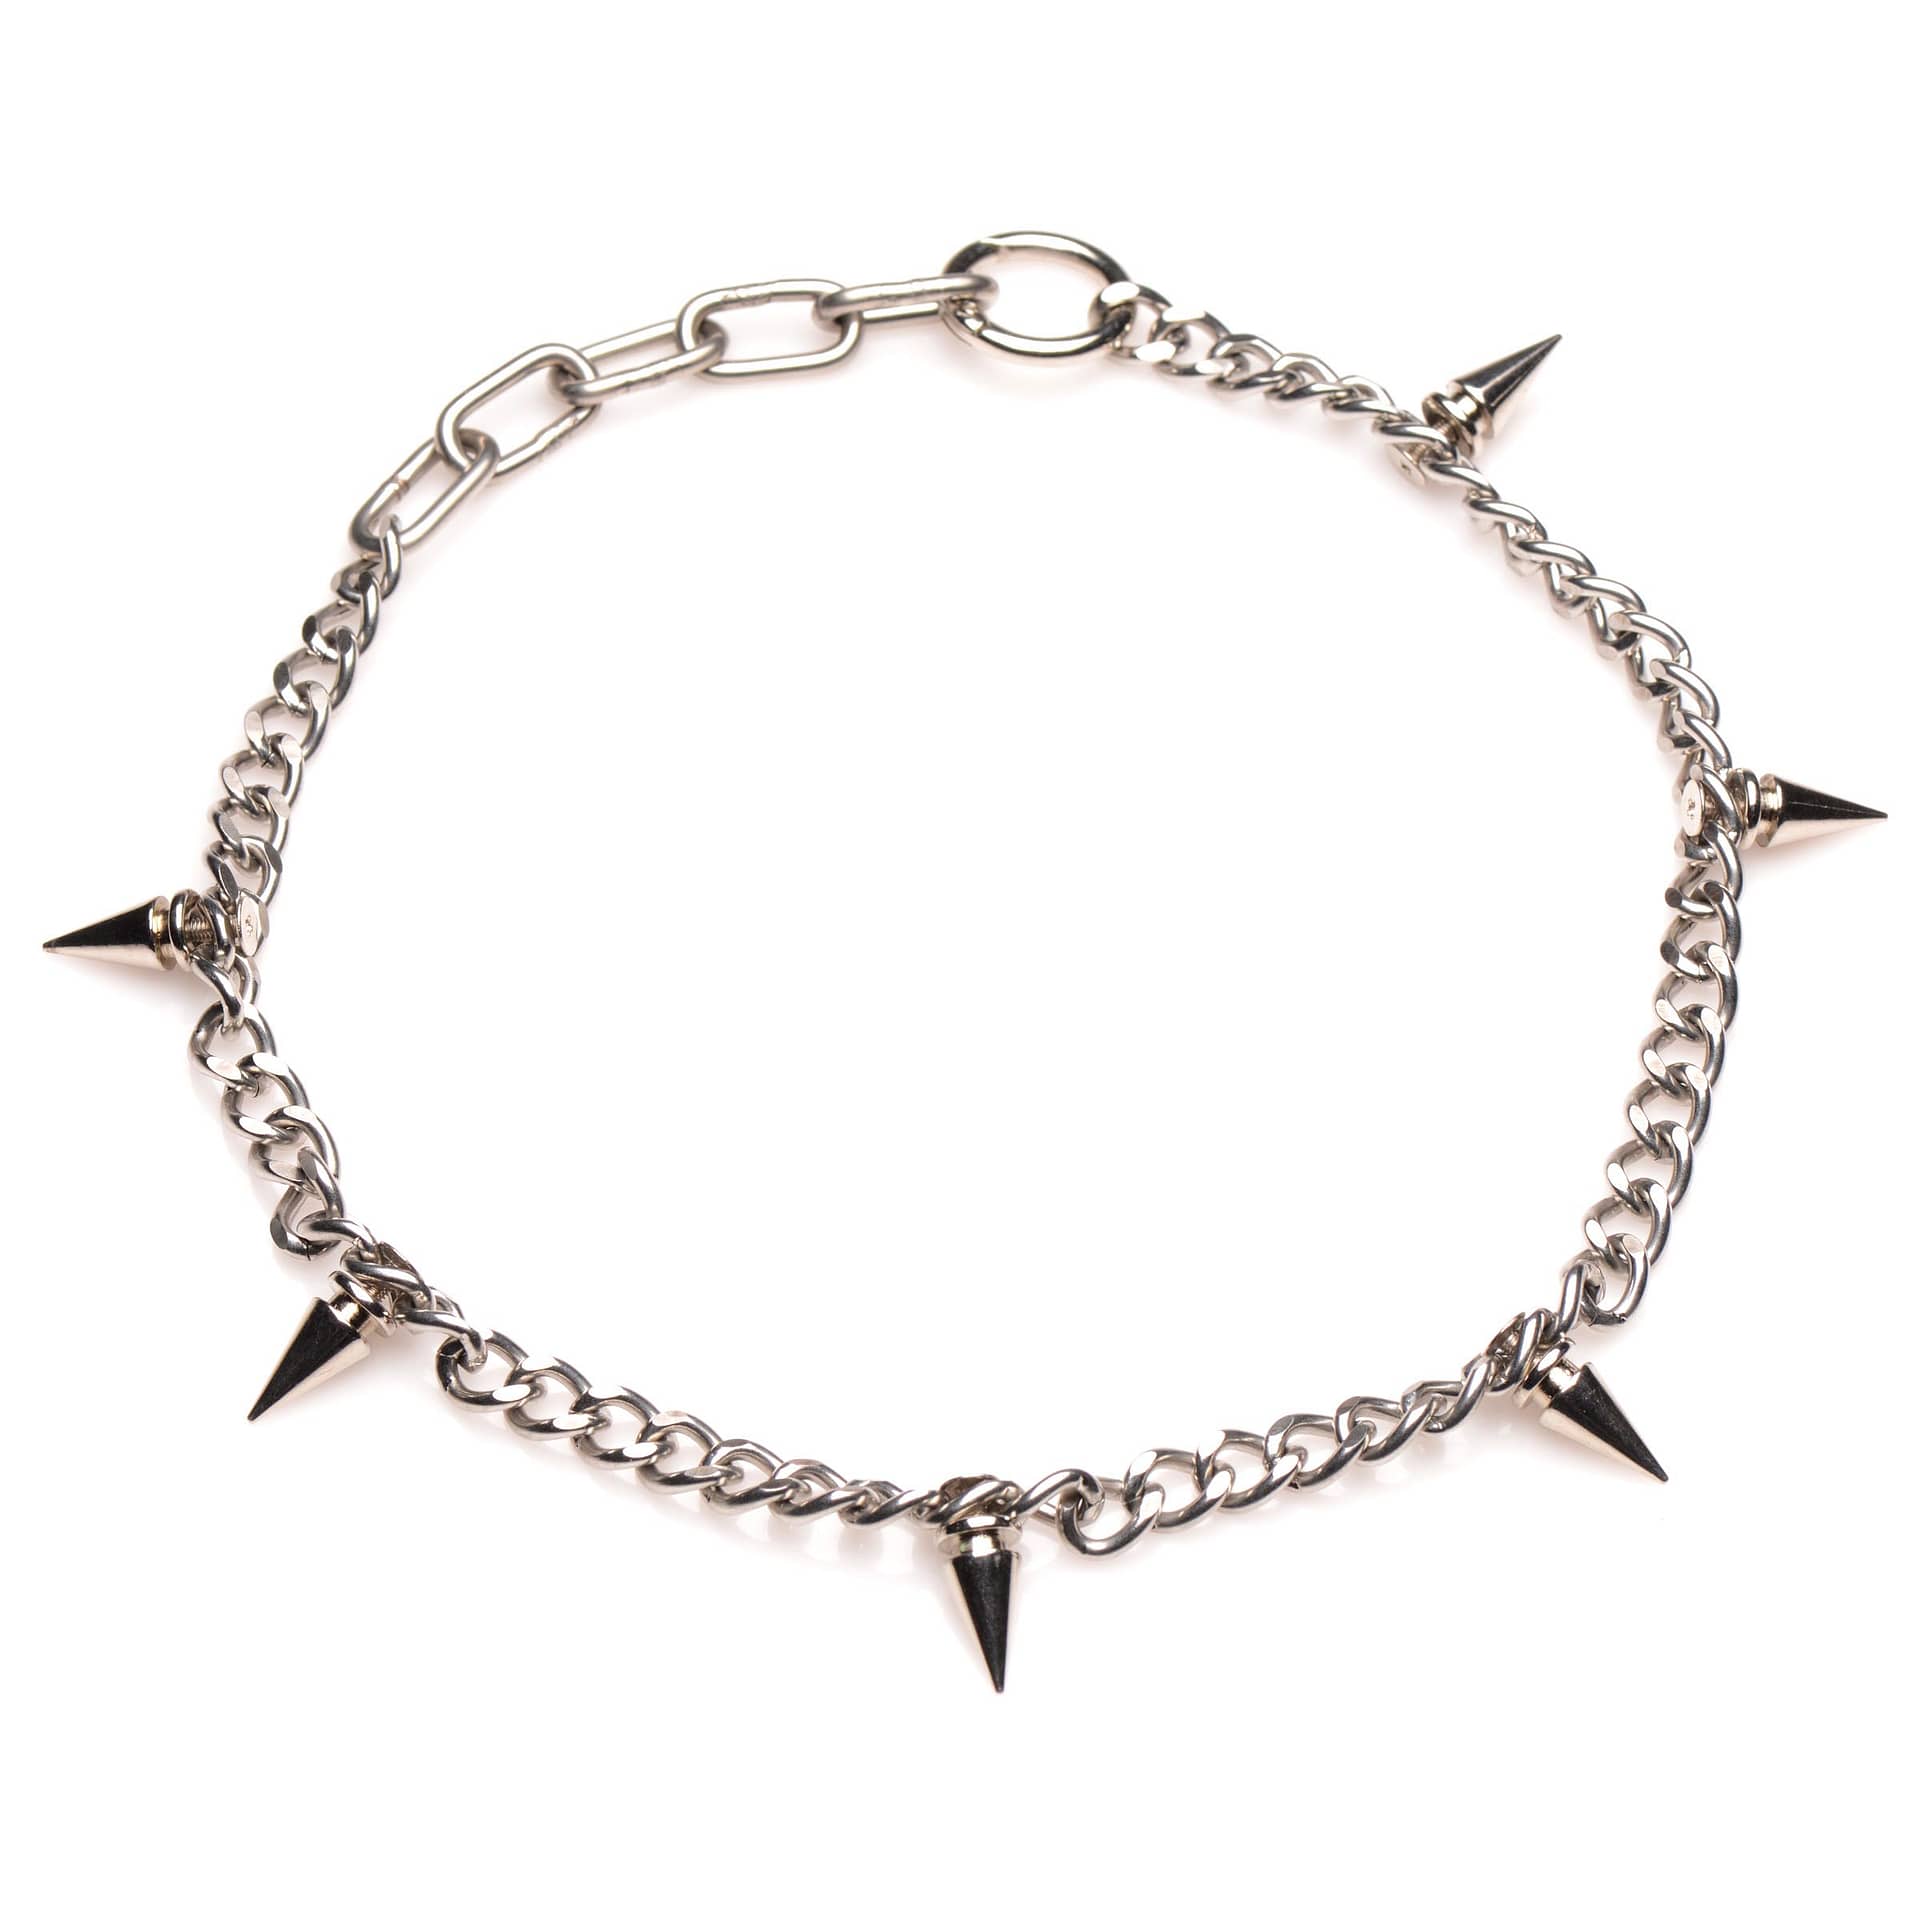 Spiked Punk Necklace – The BDSM Toy Shop